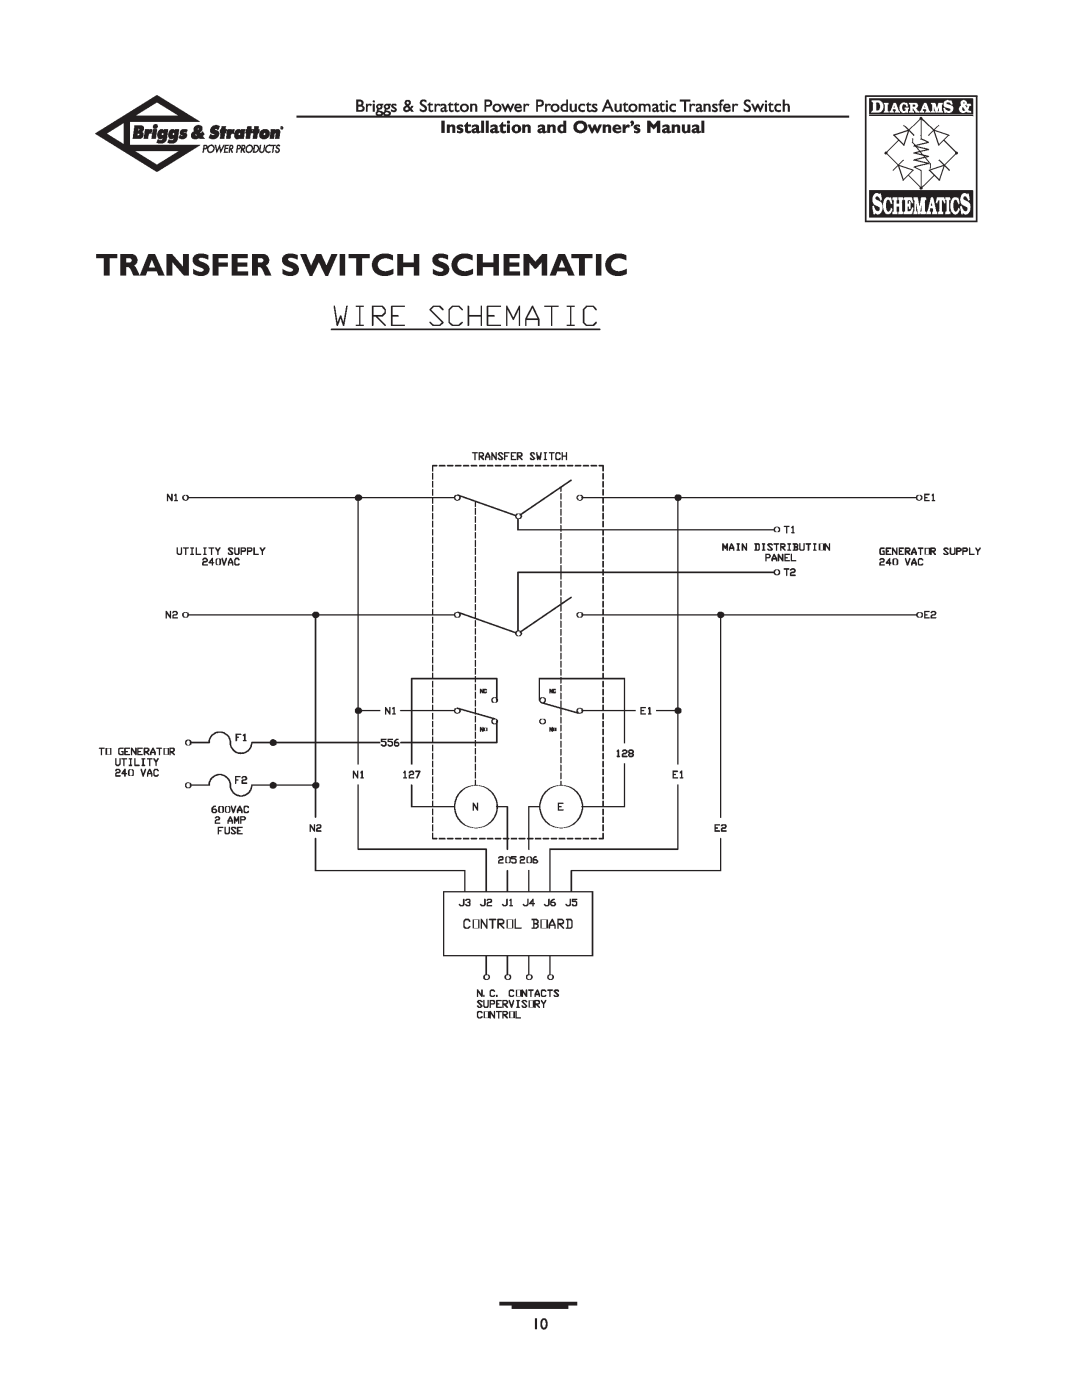 Briggs & Stratton 01814-0, 01813-0 owner manual Transfer Switch Schematic, Installation and Owner’s Manual 